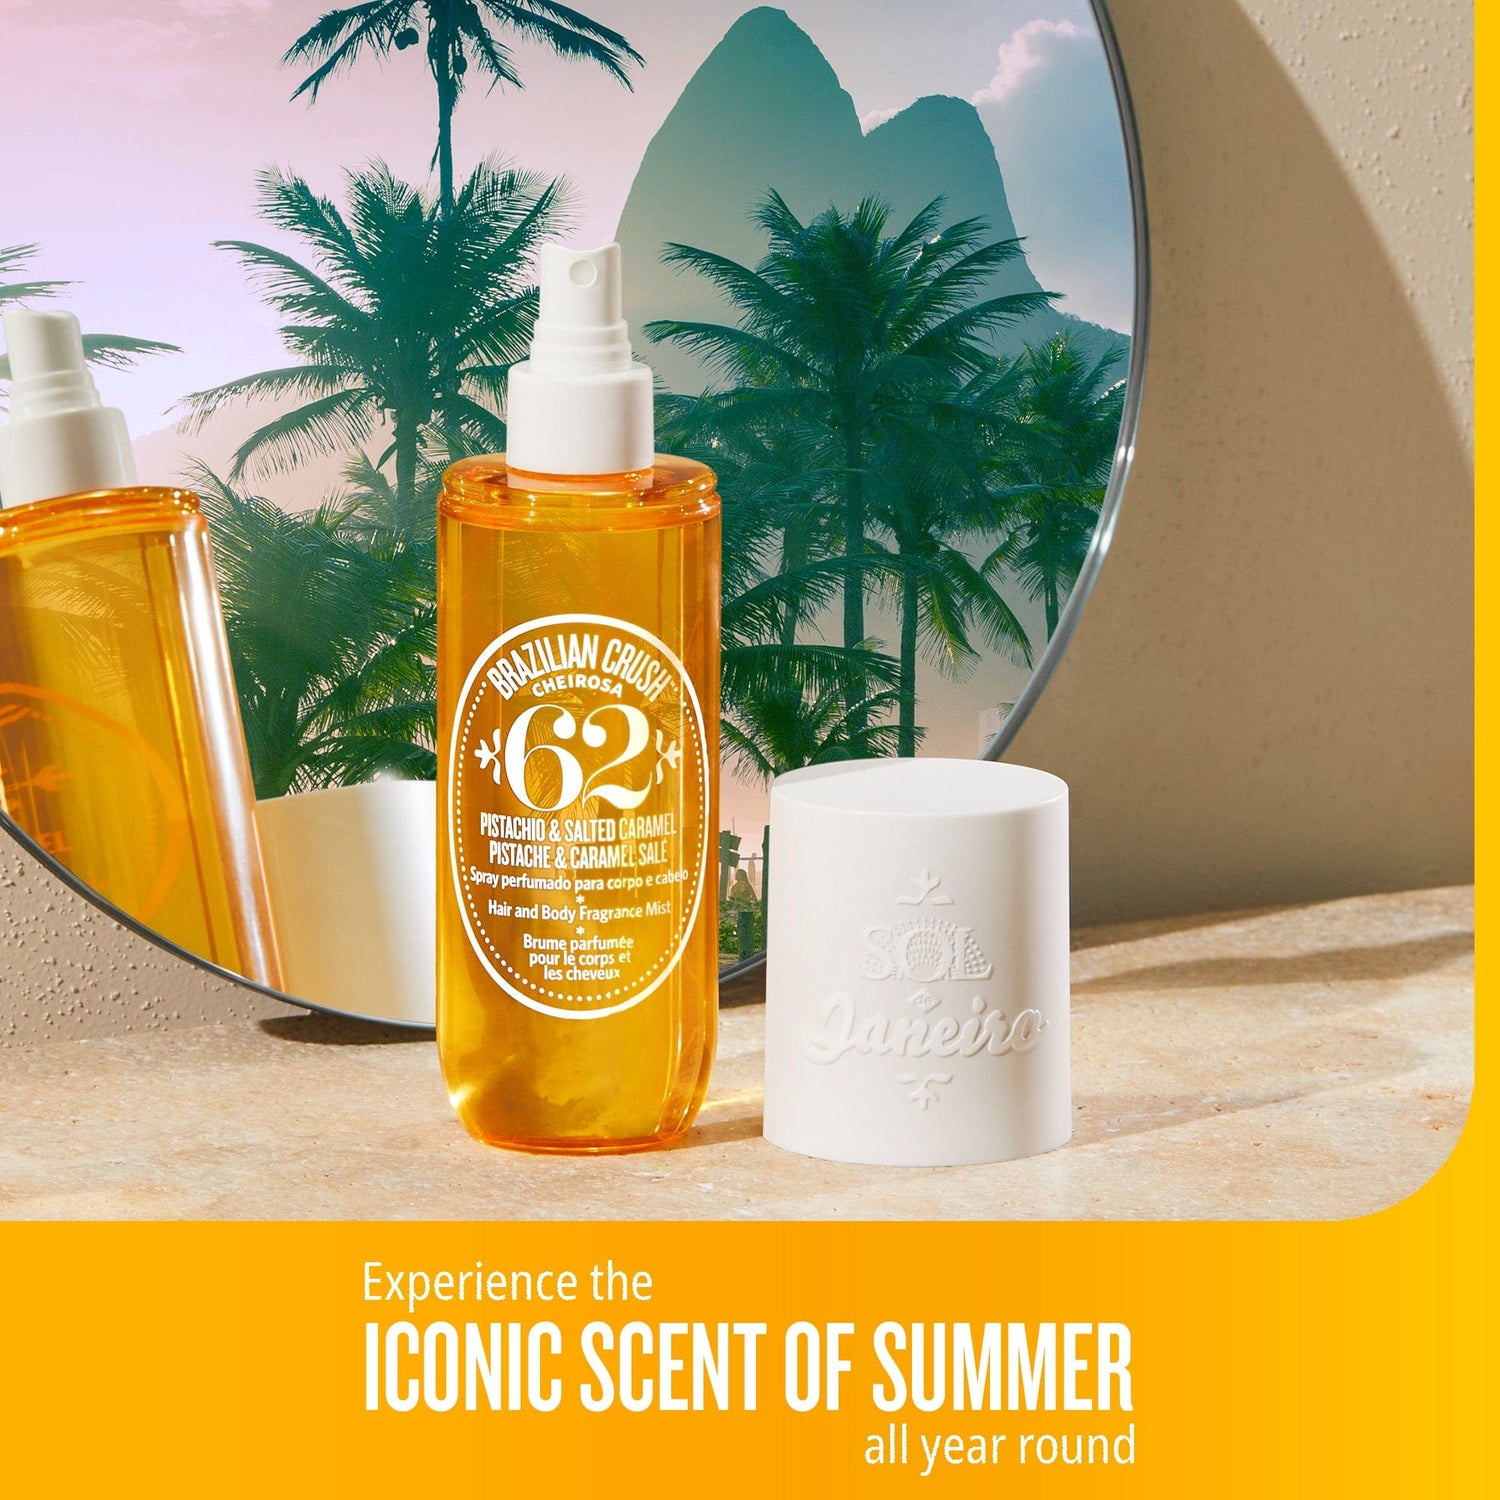 Experience the iconic scent of summer all year round